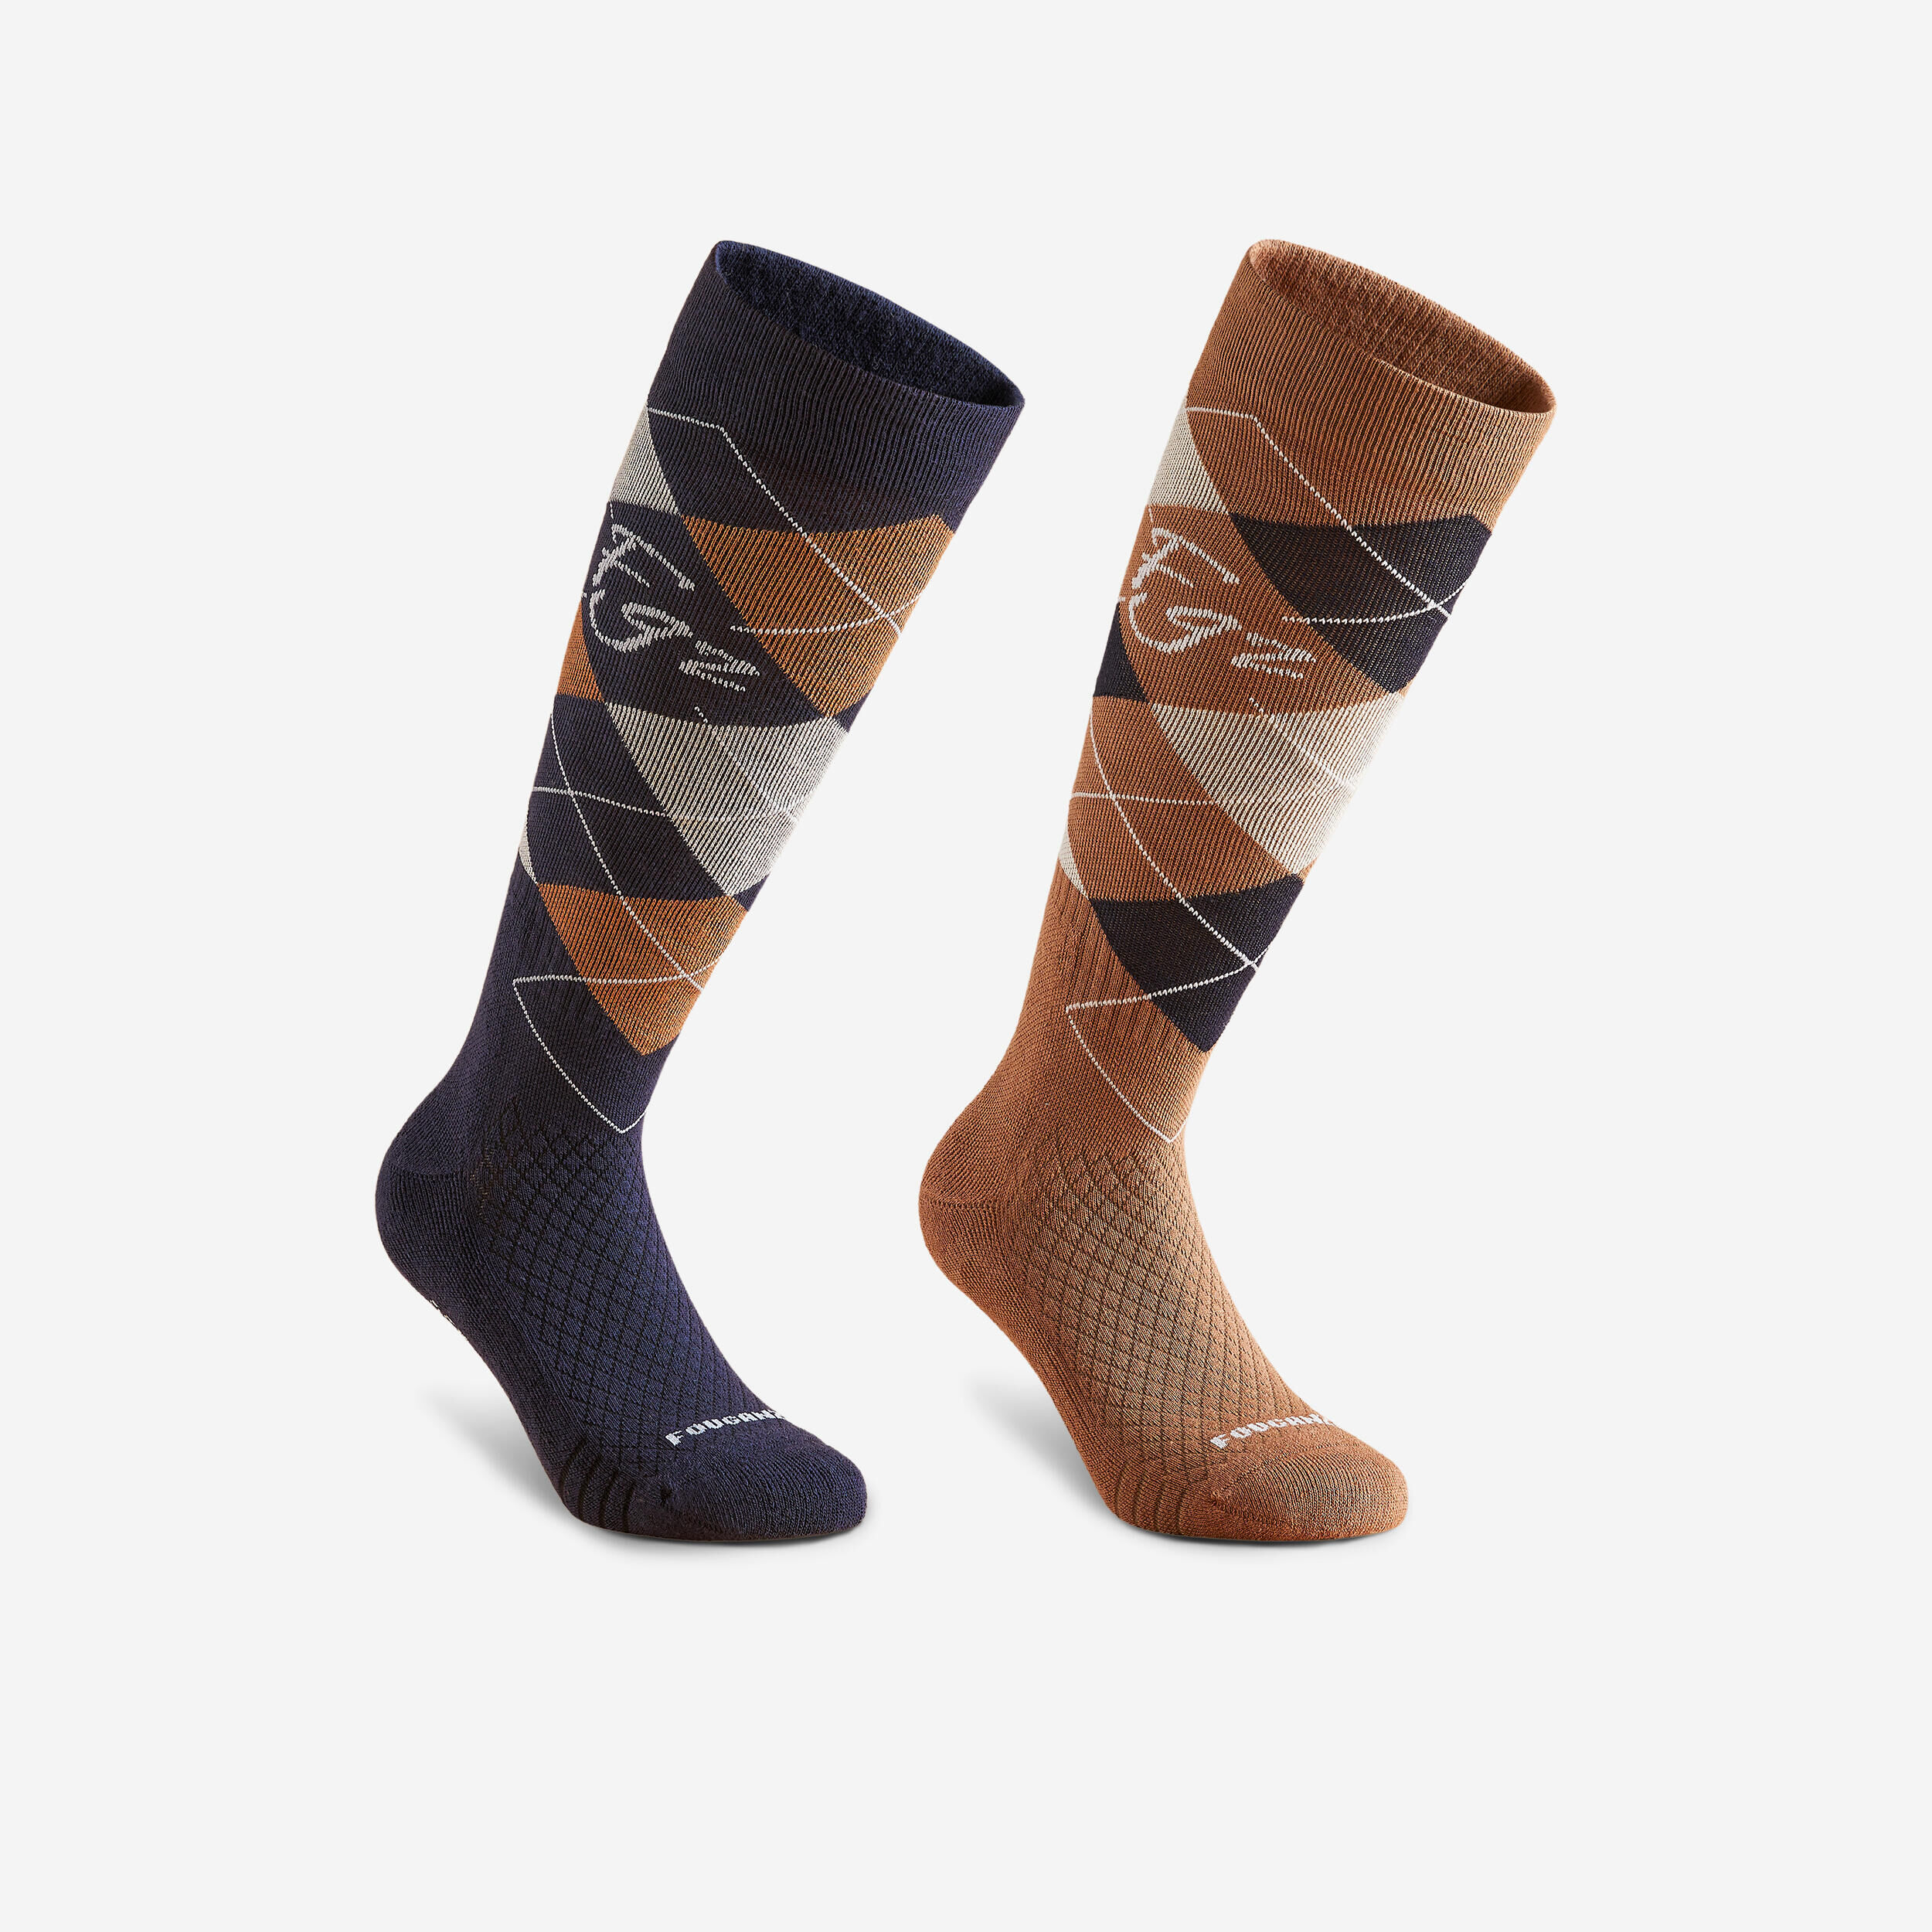 FOUGANZA Adult Horse Riding Socks 500 - Blue/Black/Brown GraphPack of 2